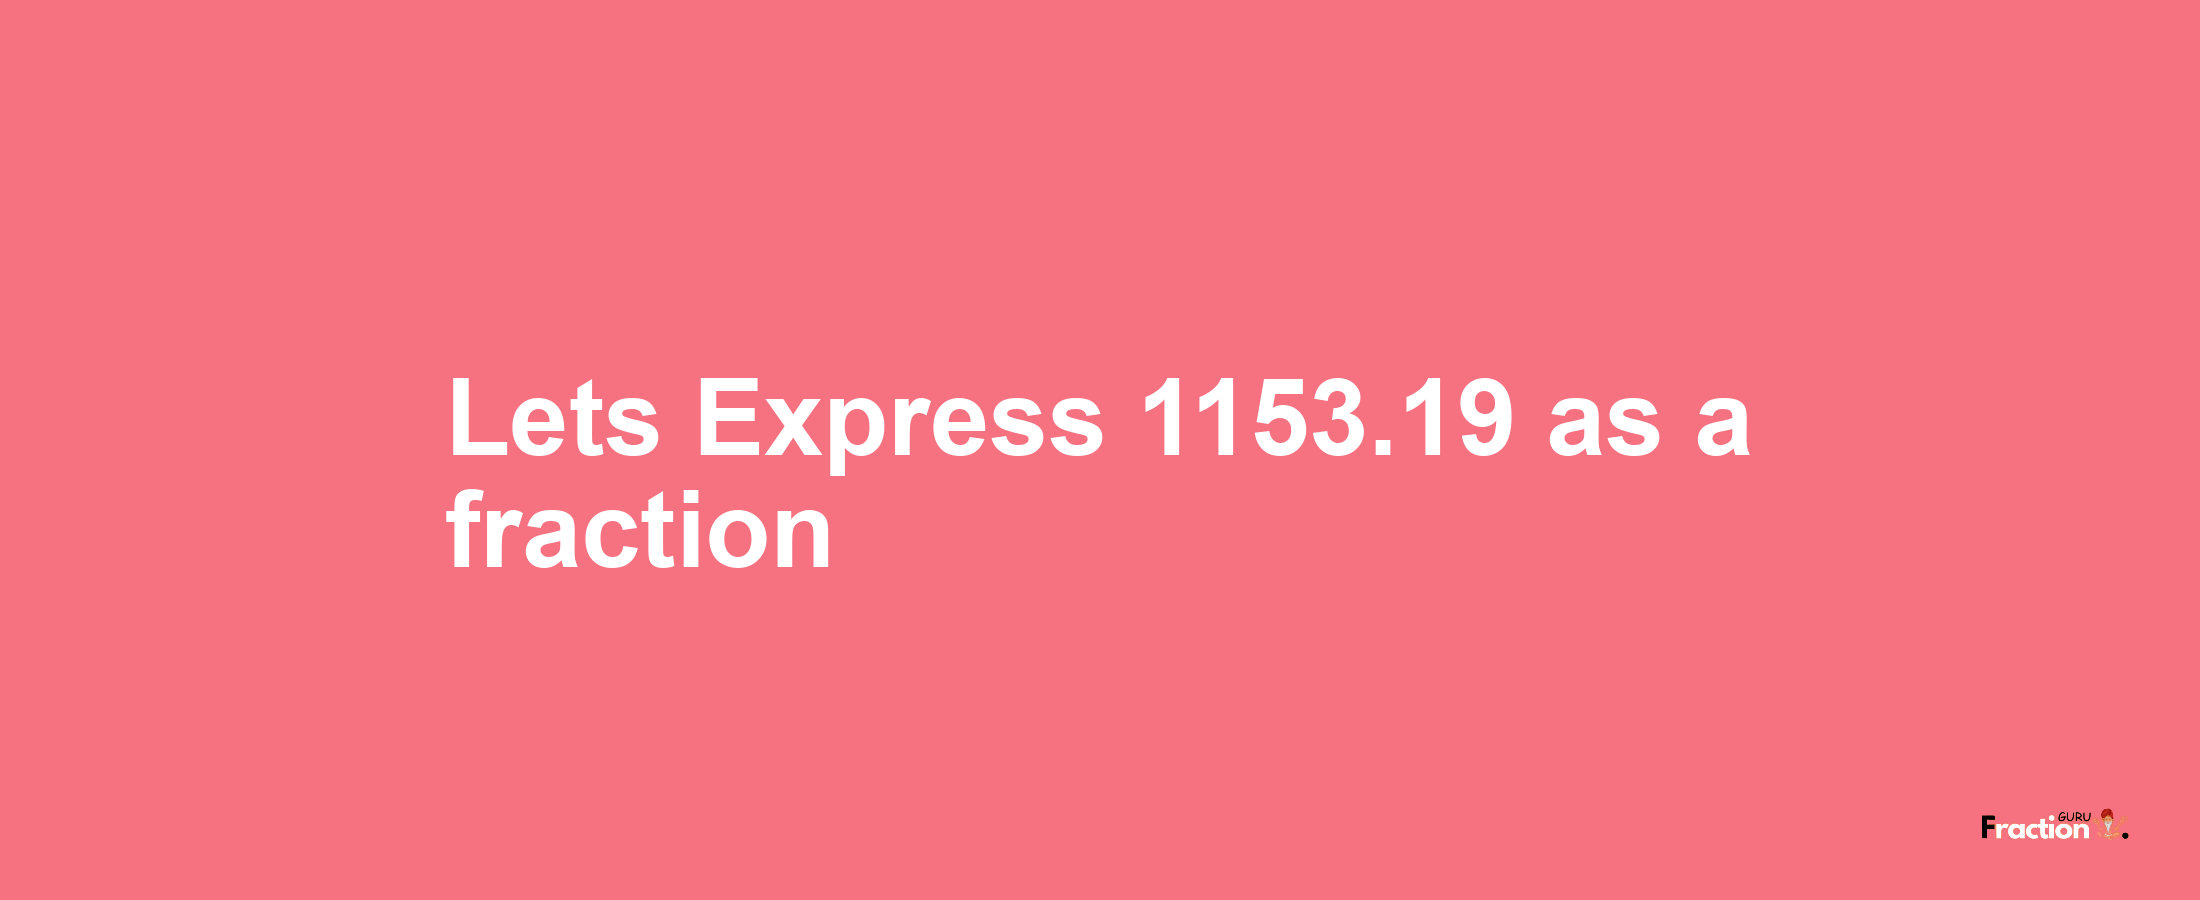 Lets Express 1153.19 as afraction